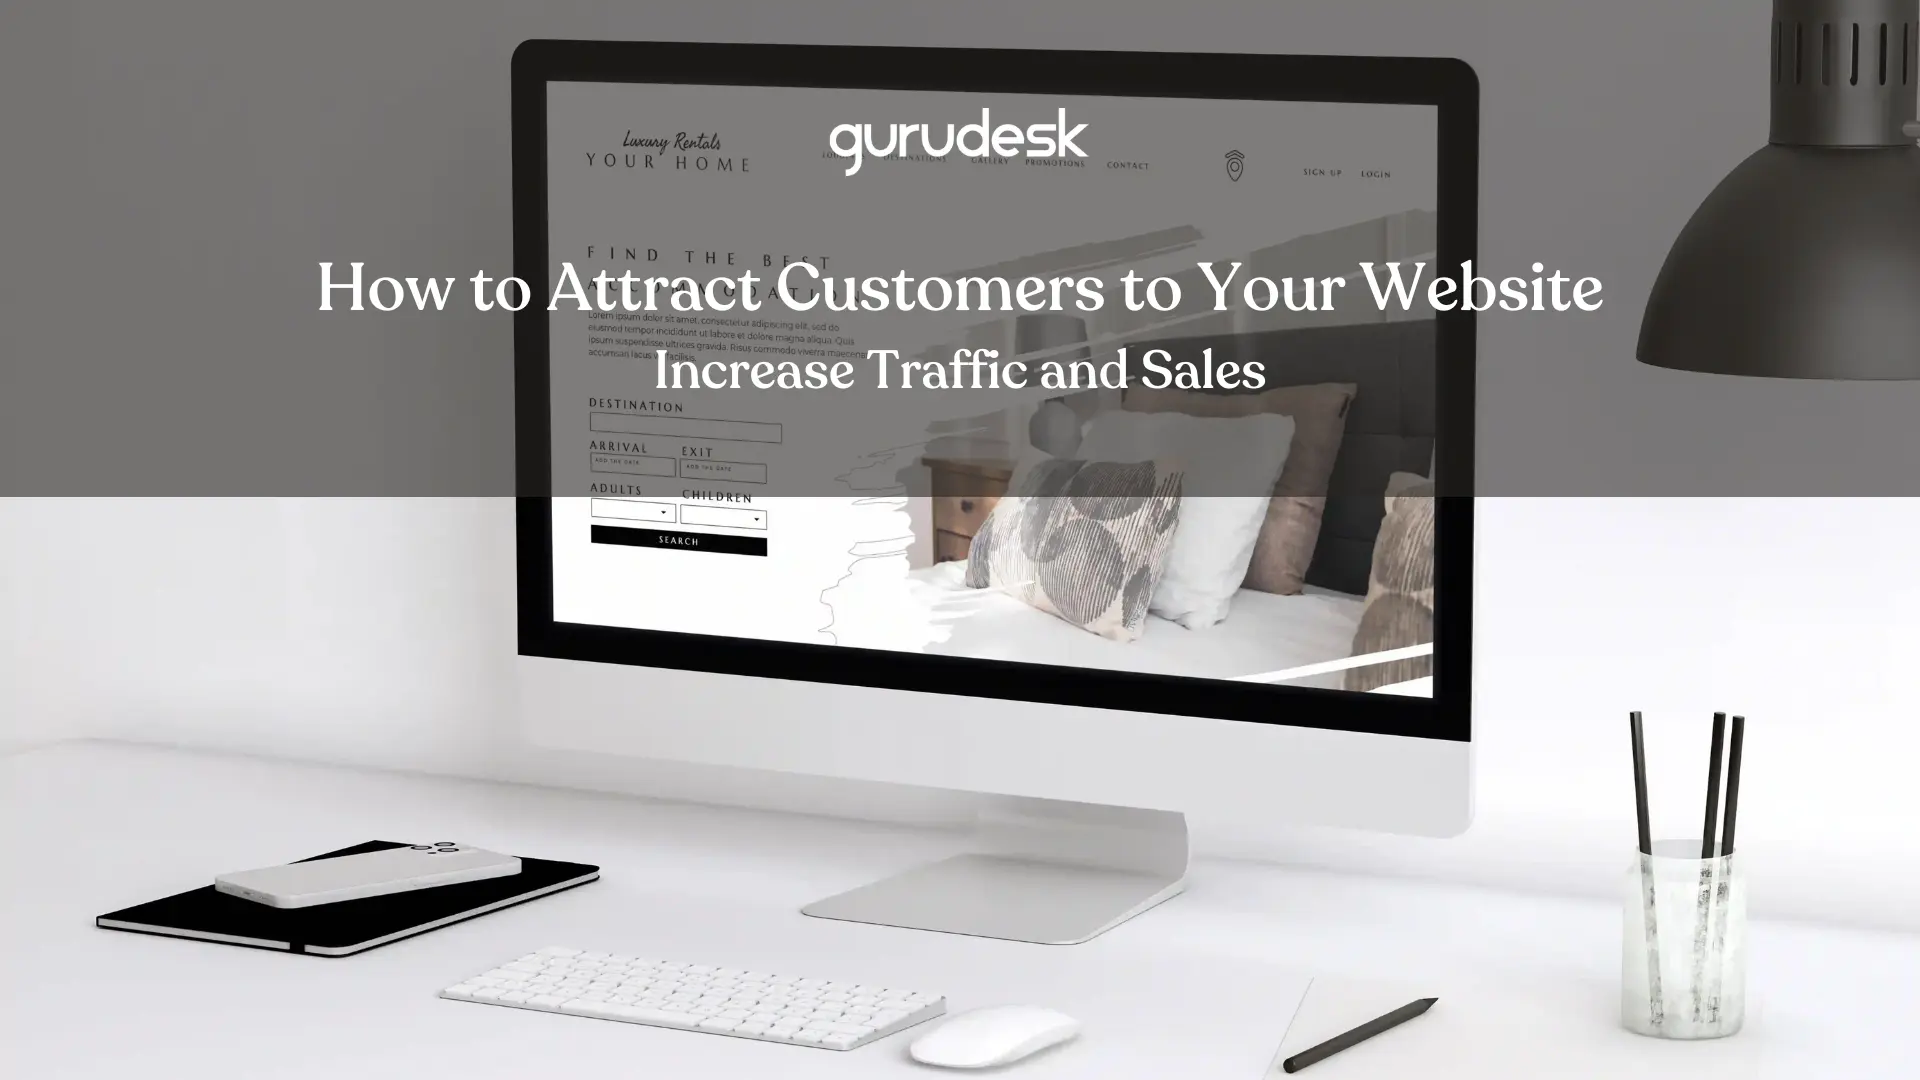 how to attract customers to your website? Increase traffic and sales with the following guide.